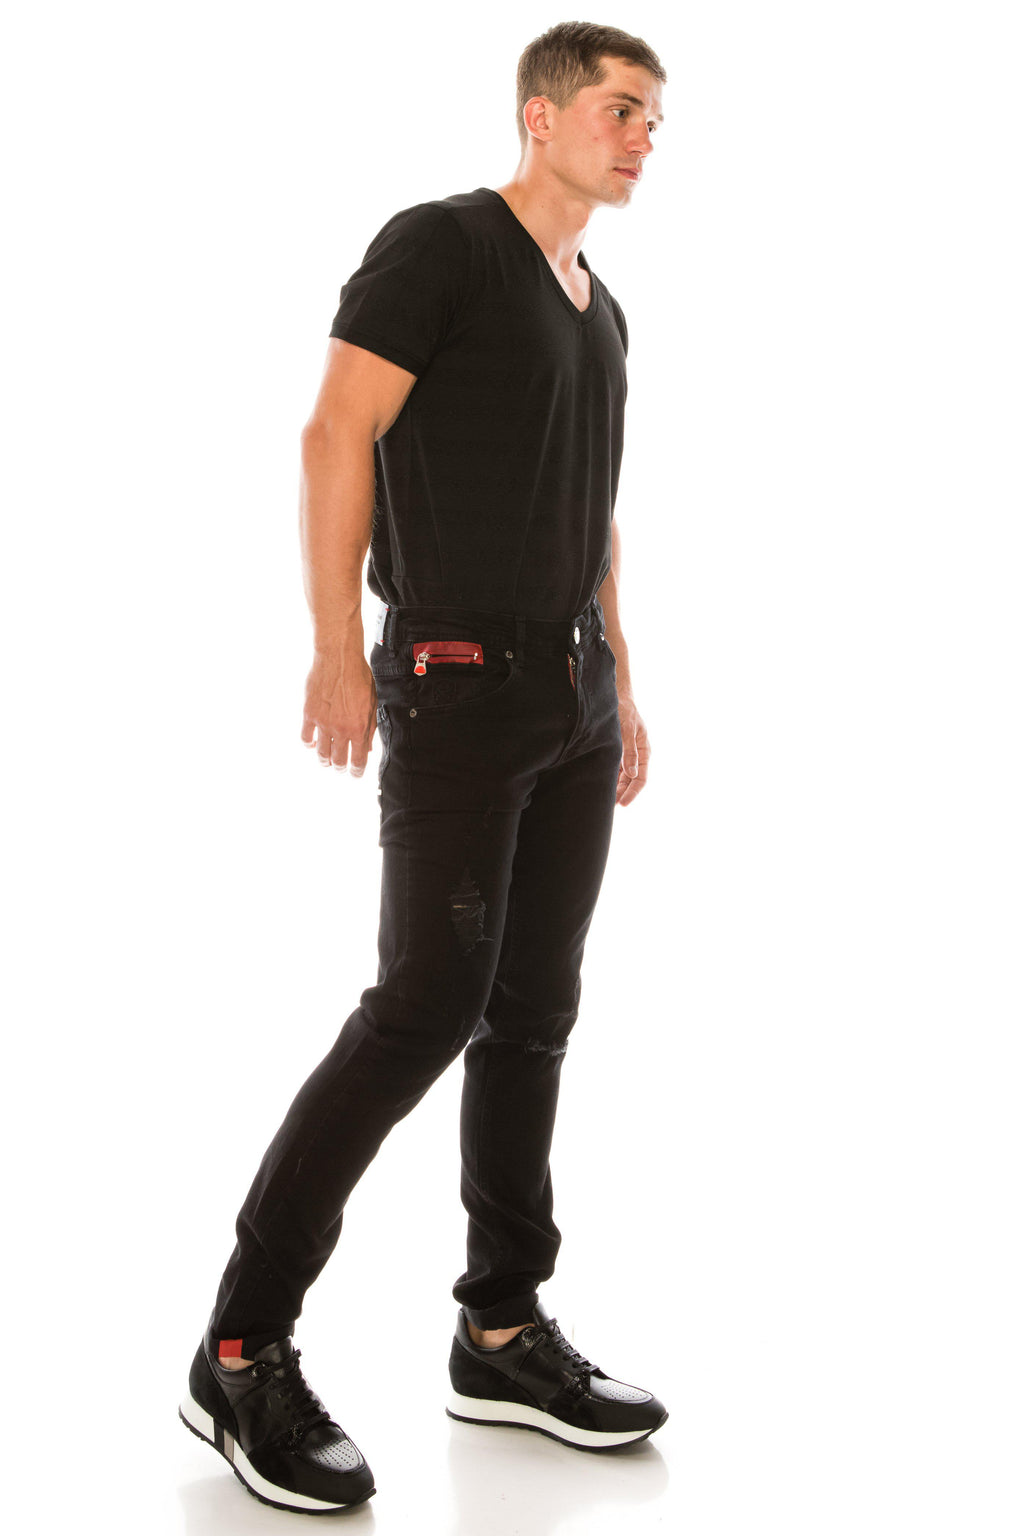 jord Alabama Rusten Ripped Washed Skinny Jeans - Black Red | Ron Tomson